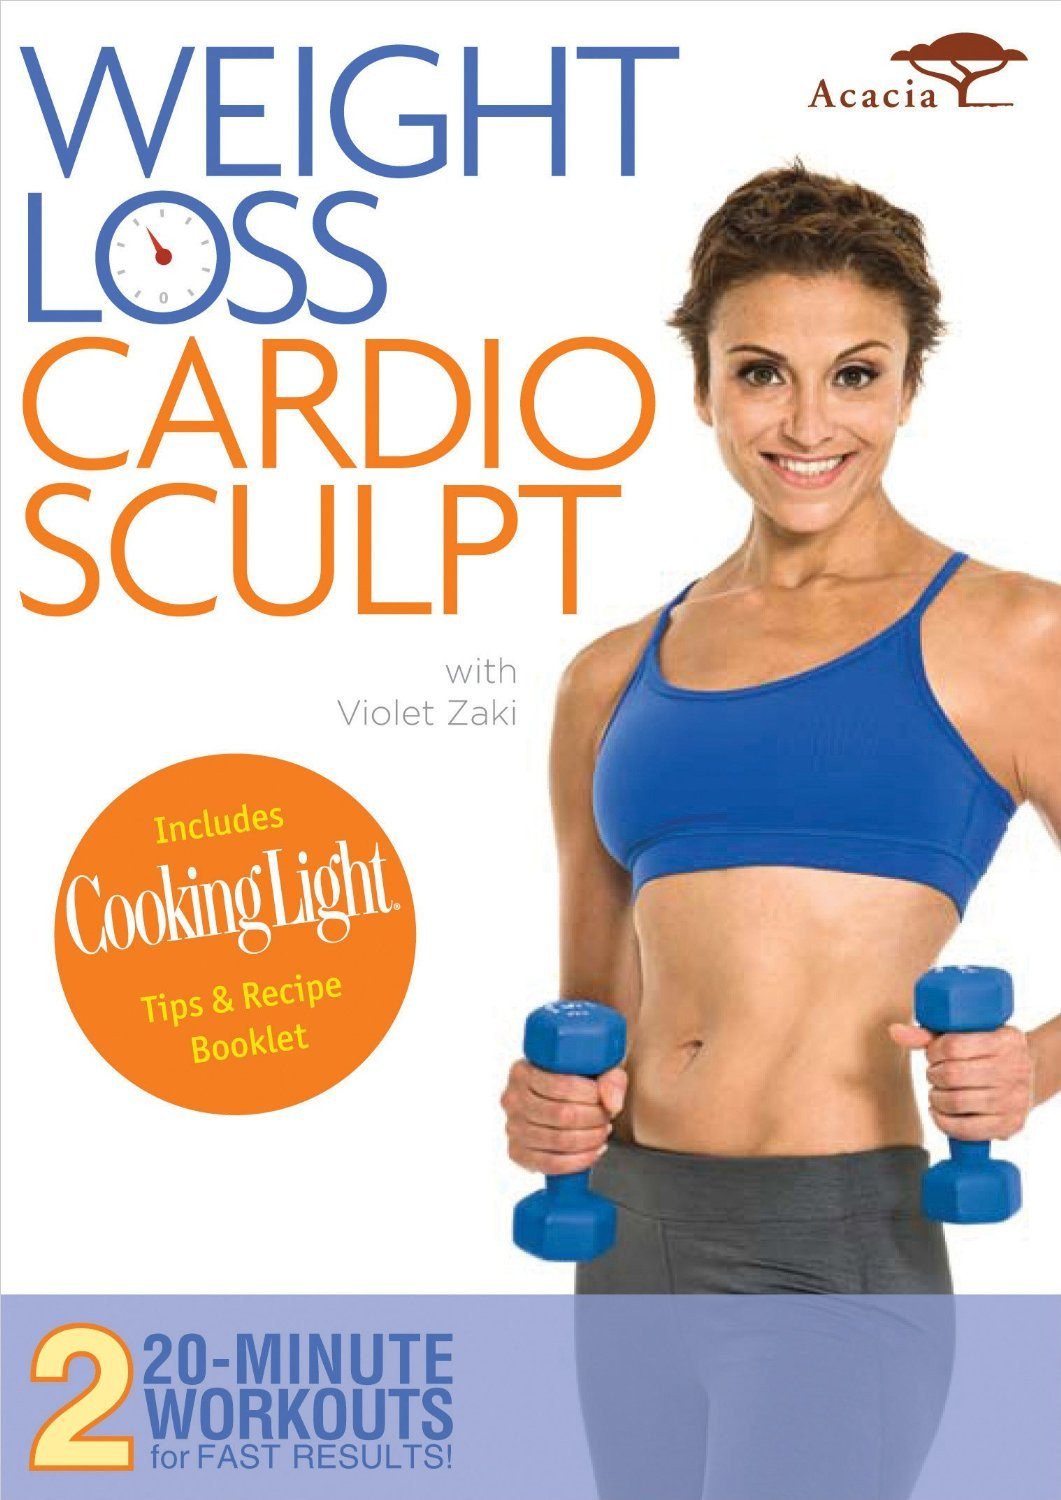 30 Minute Cardio Sculpt with Weights for Sculpting and